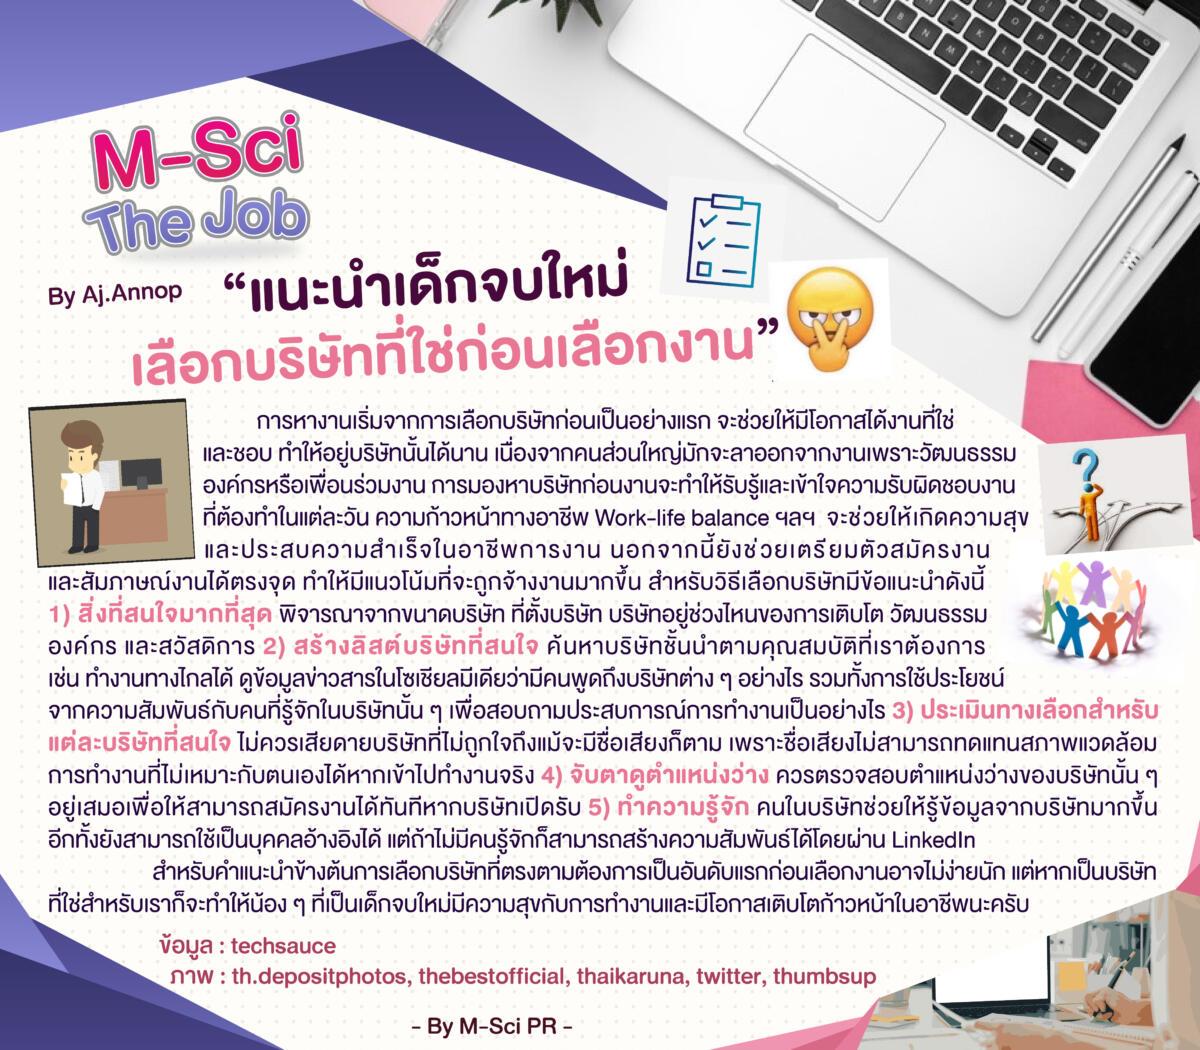 M-Sci-the-Job-TP-ep-16-01